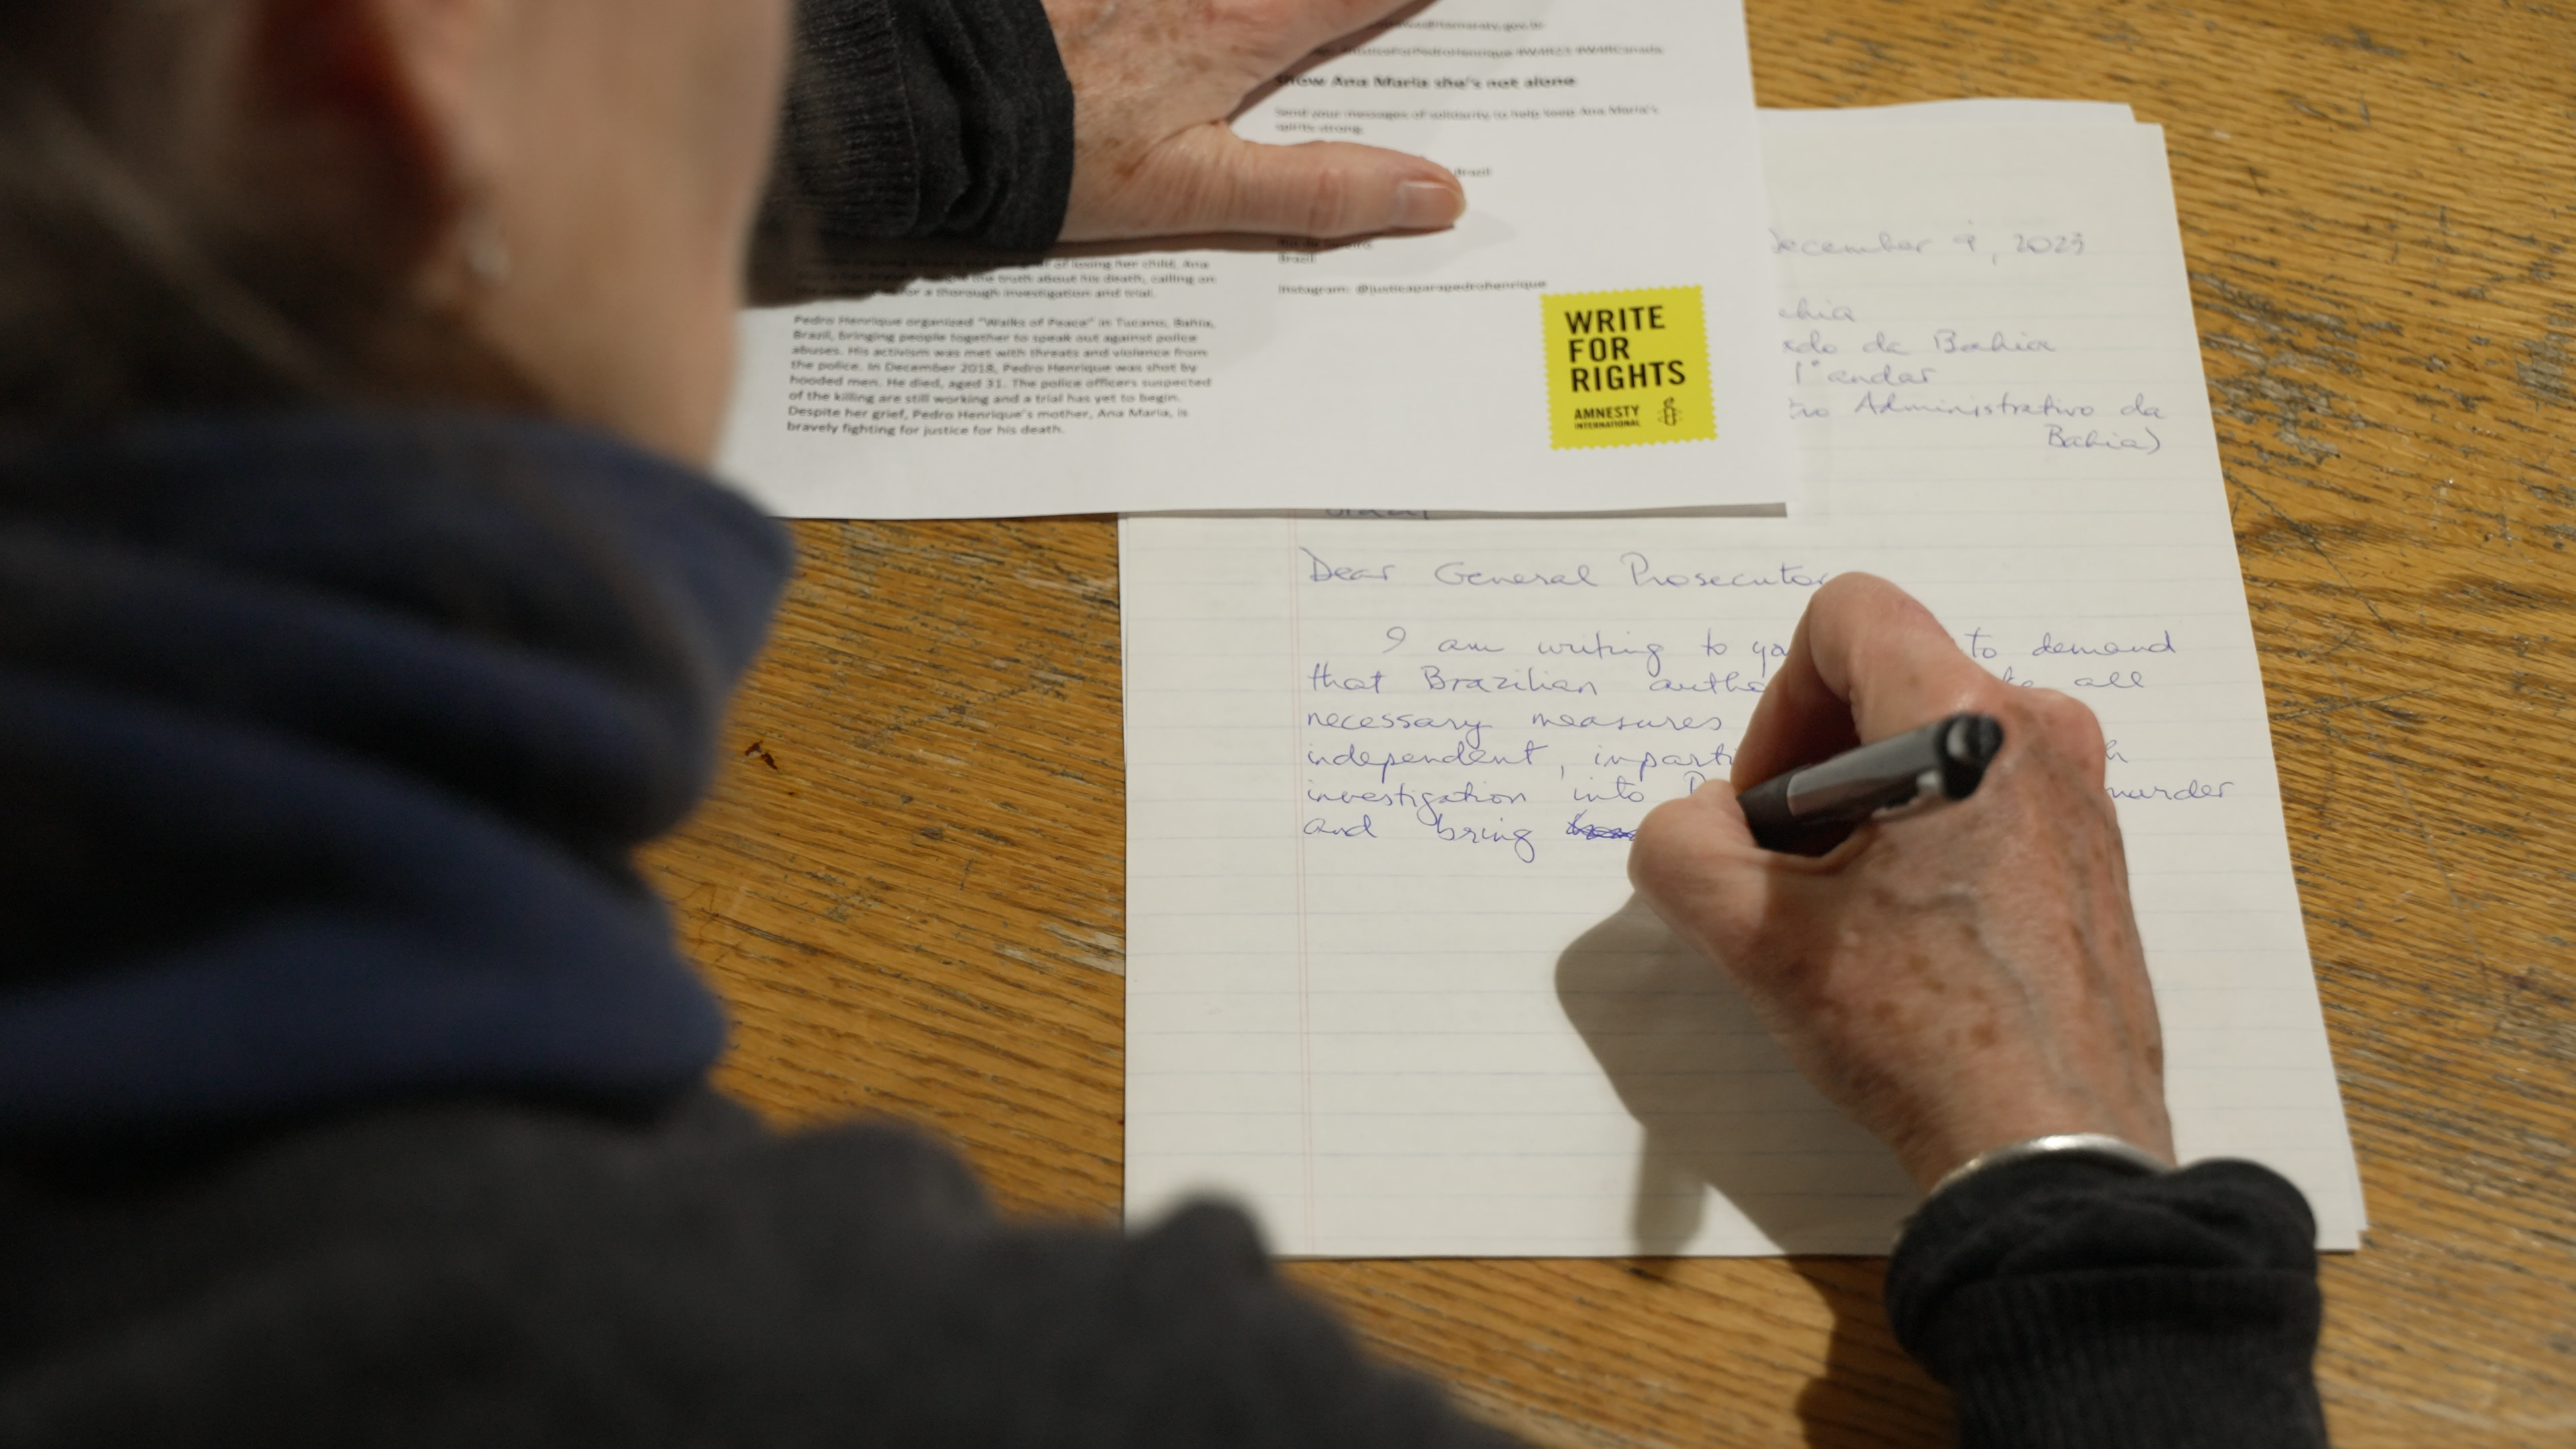 A volunteer writing a letter at the Write for Rights event in Canada